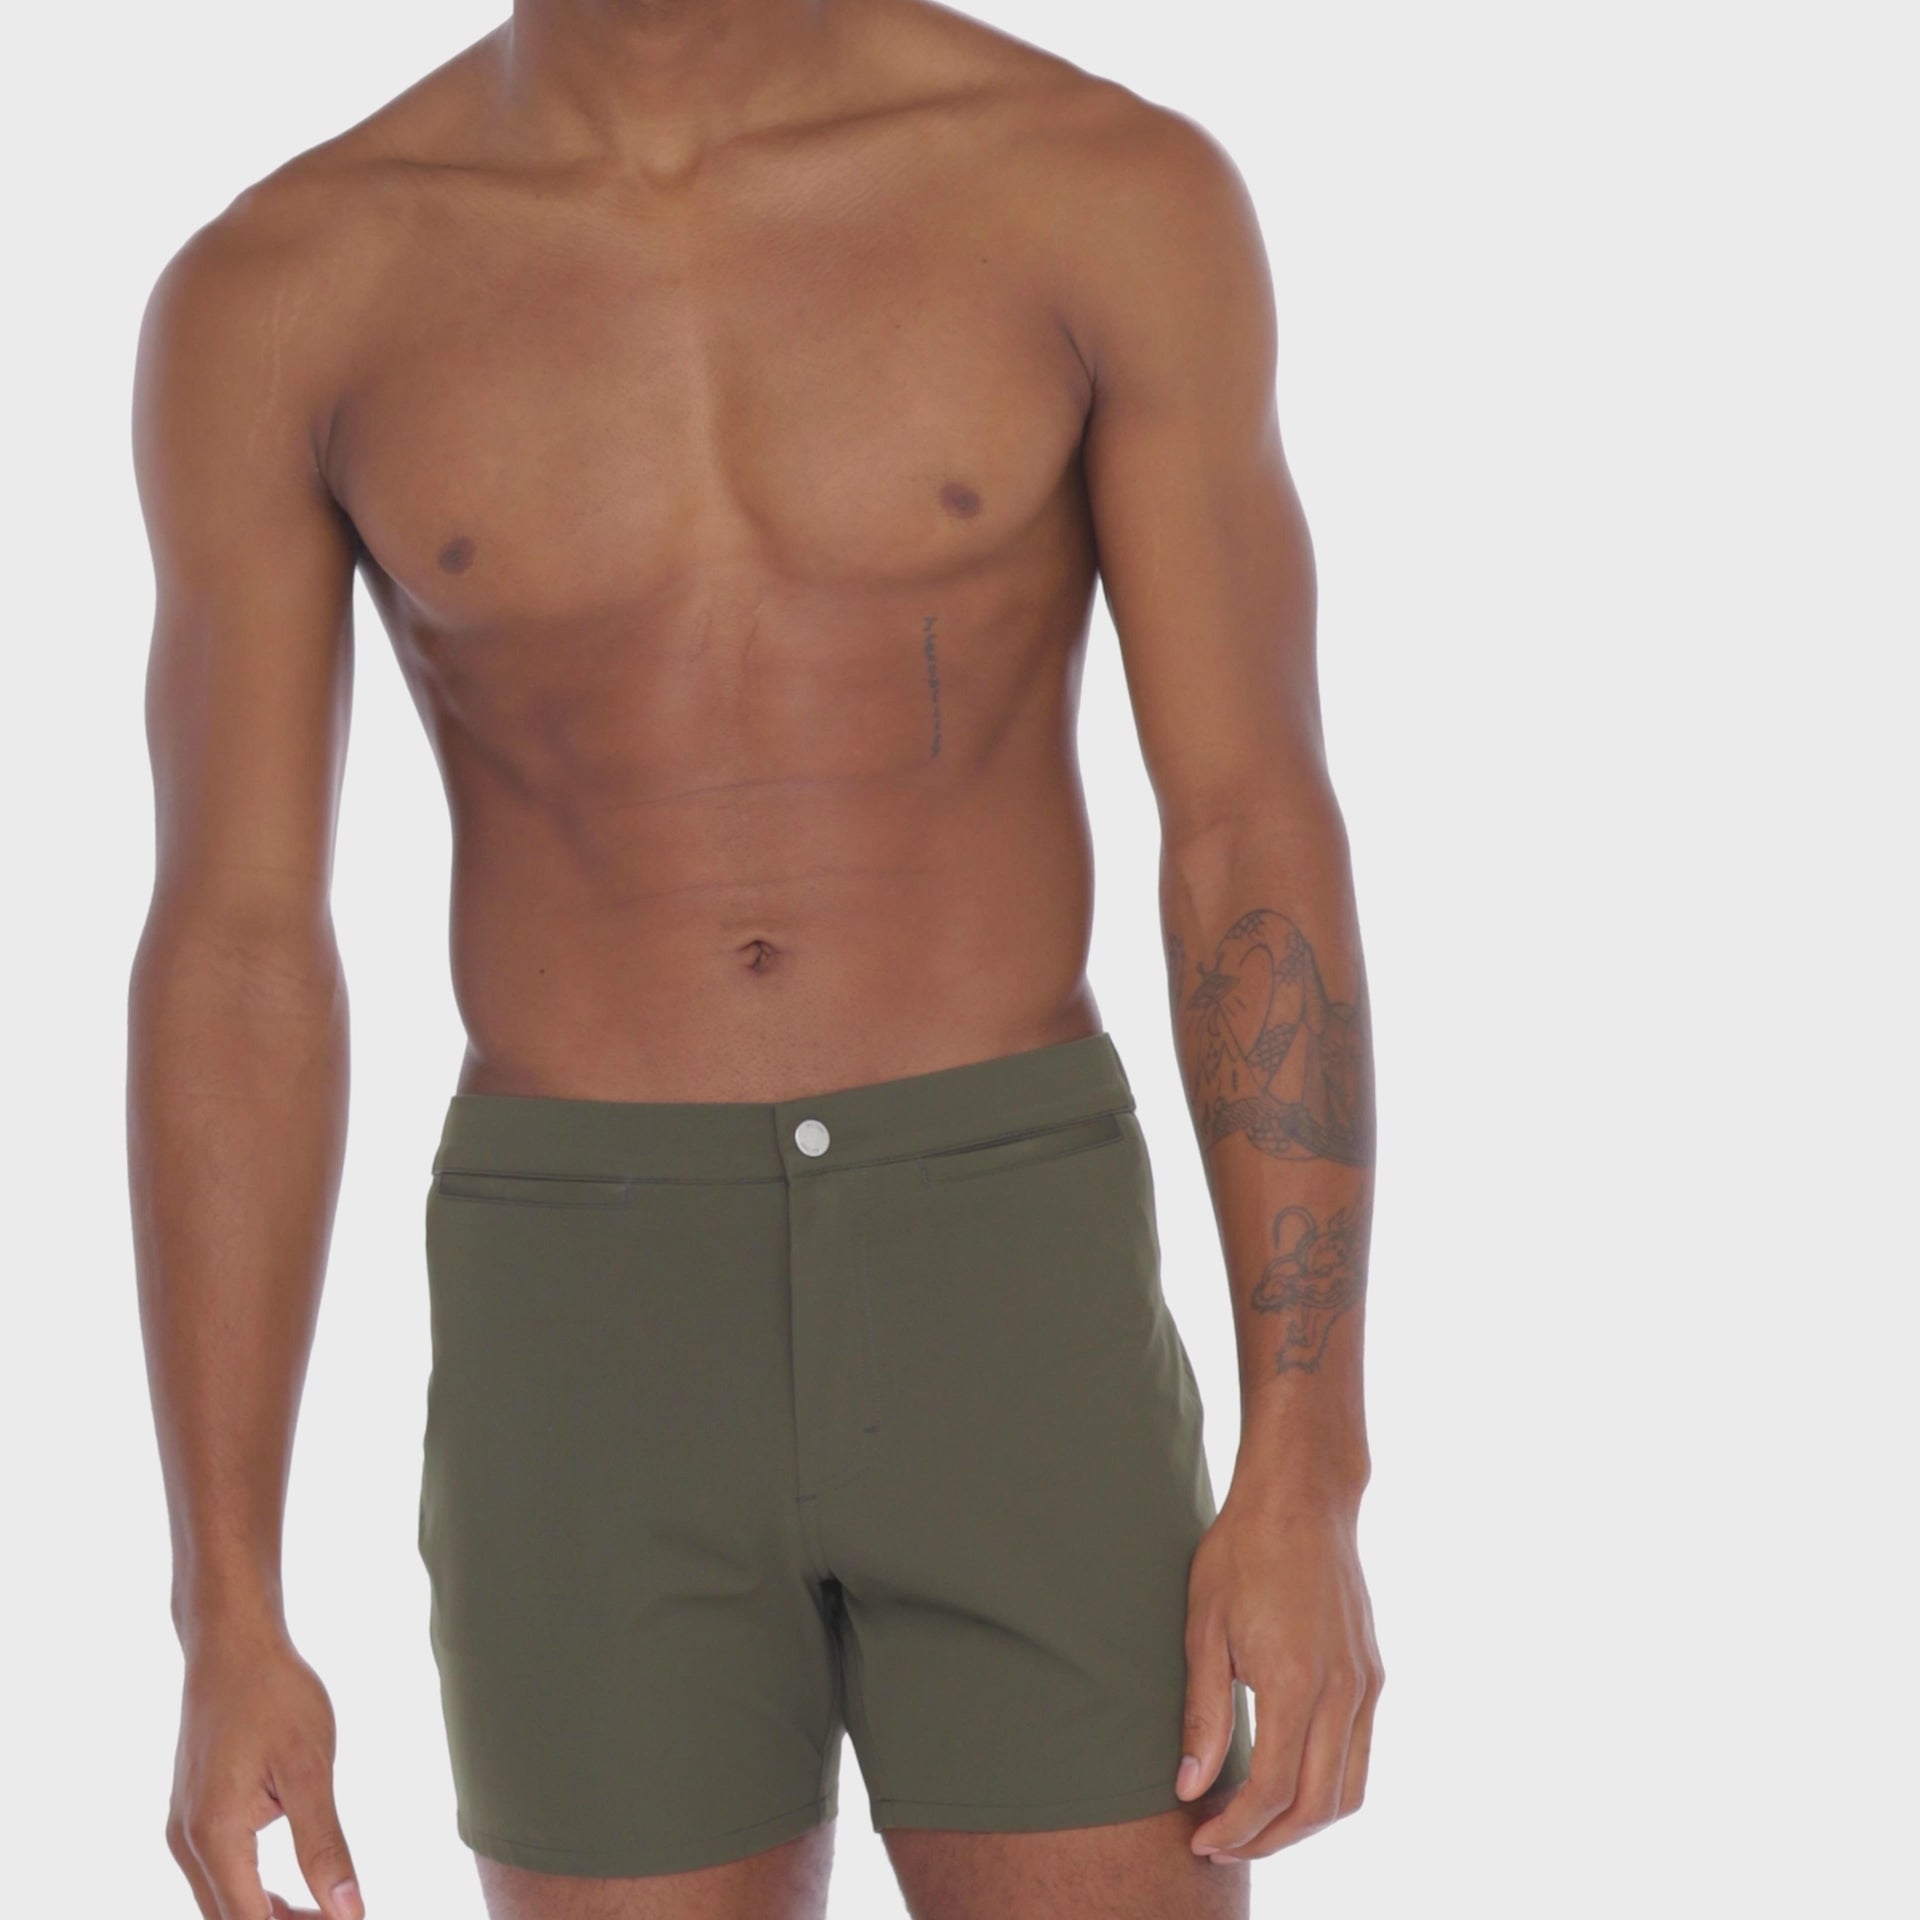 A WHITE WALL VIDEO OF A MALE MODEL WEARING A SAMMY SHOP UNISEX OLIVE VERSATILE SHORT